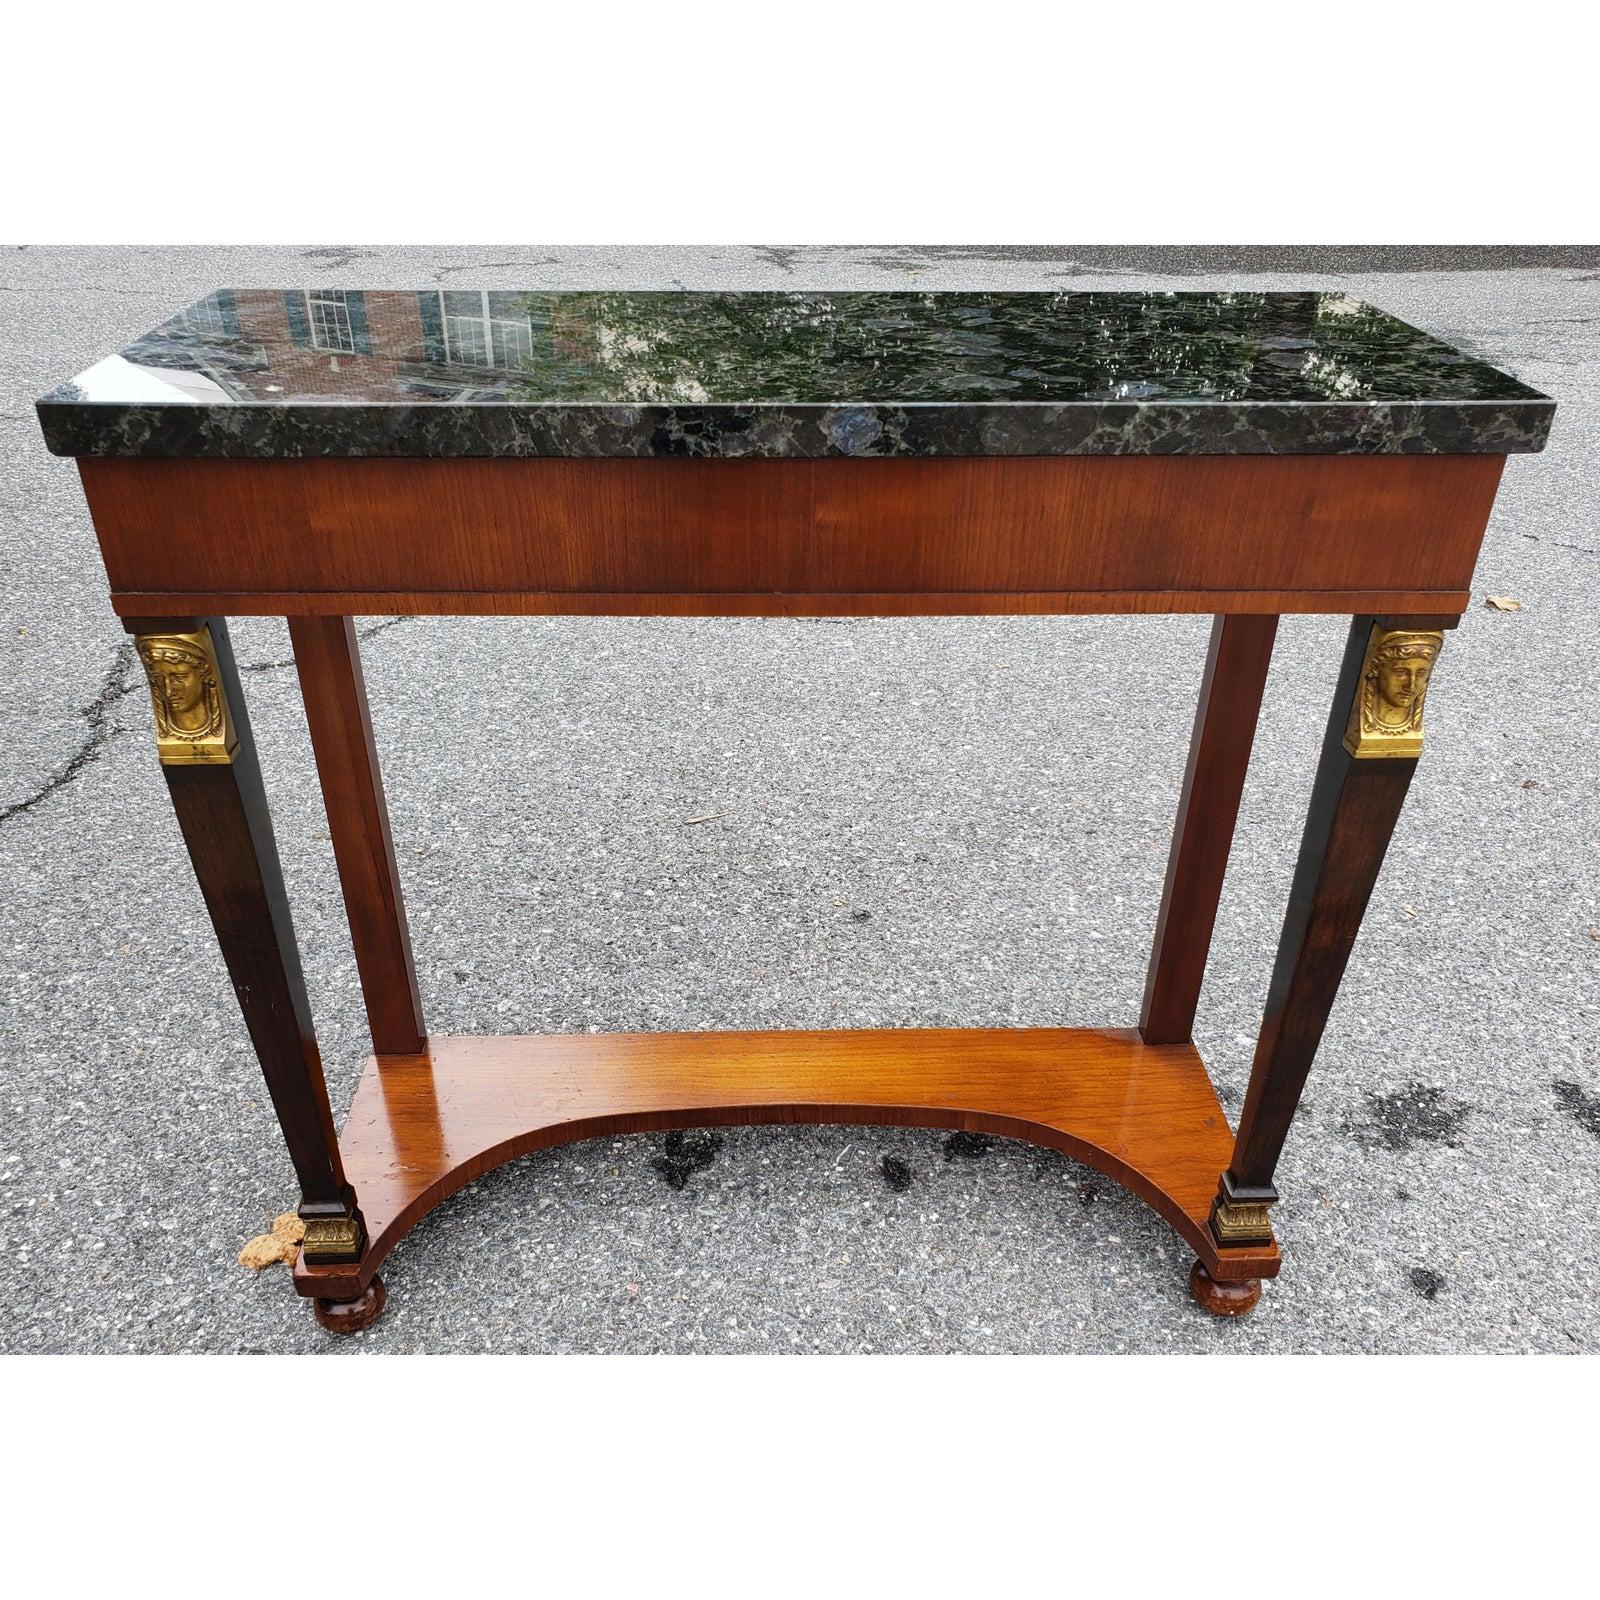 Regency vintage console table or hall table with marble / stone top. Bottom shelf for additional display space. Solid decorative brass human head. Excellent condition. Table 32 inch wide x 12inch in depth x 31 inch in height. Stone top comes loose